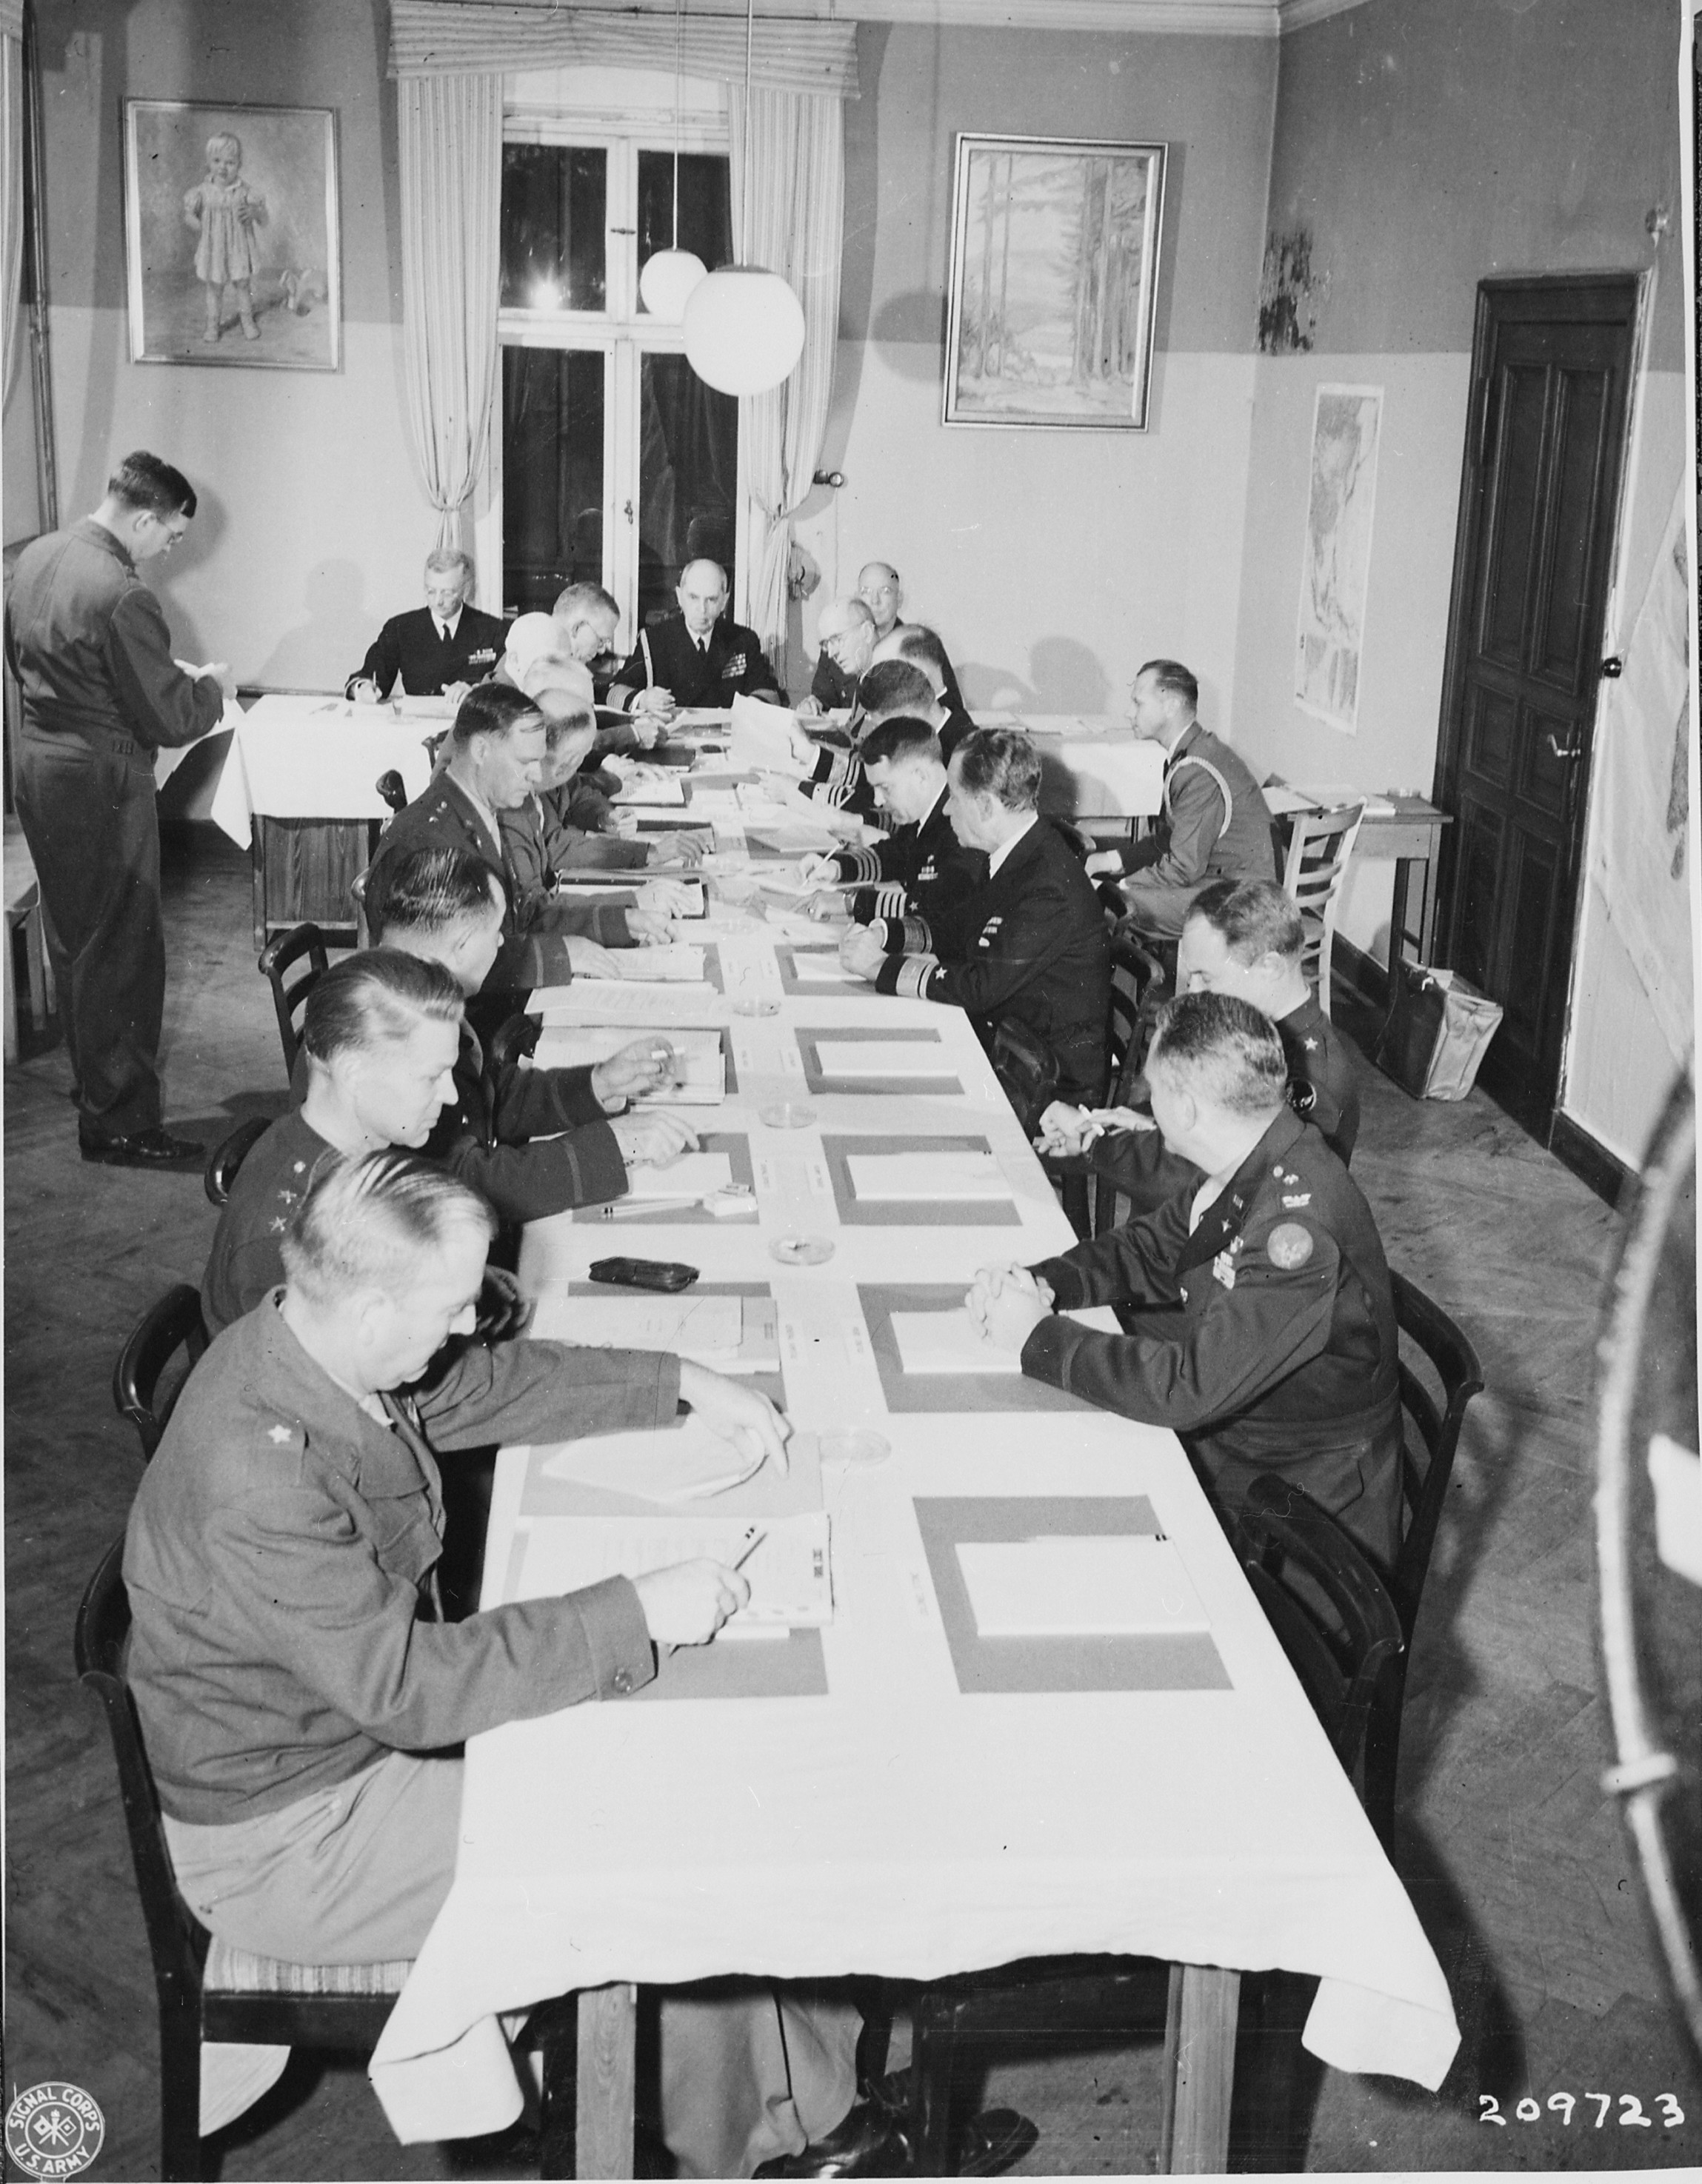 William Leahy presiding over a US staff meeting during the Potsdam Conference, Germany, 23 Jul 1945